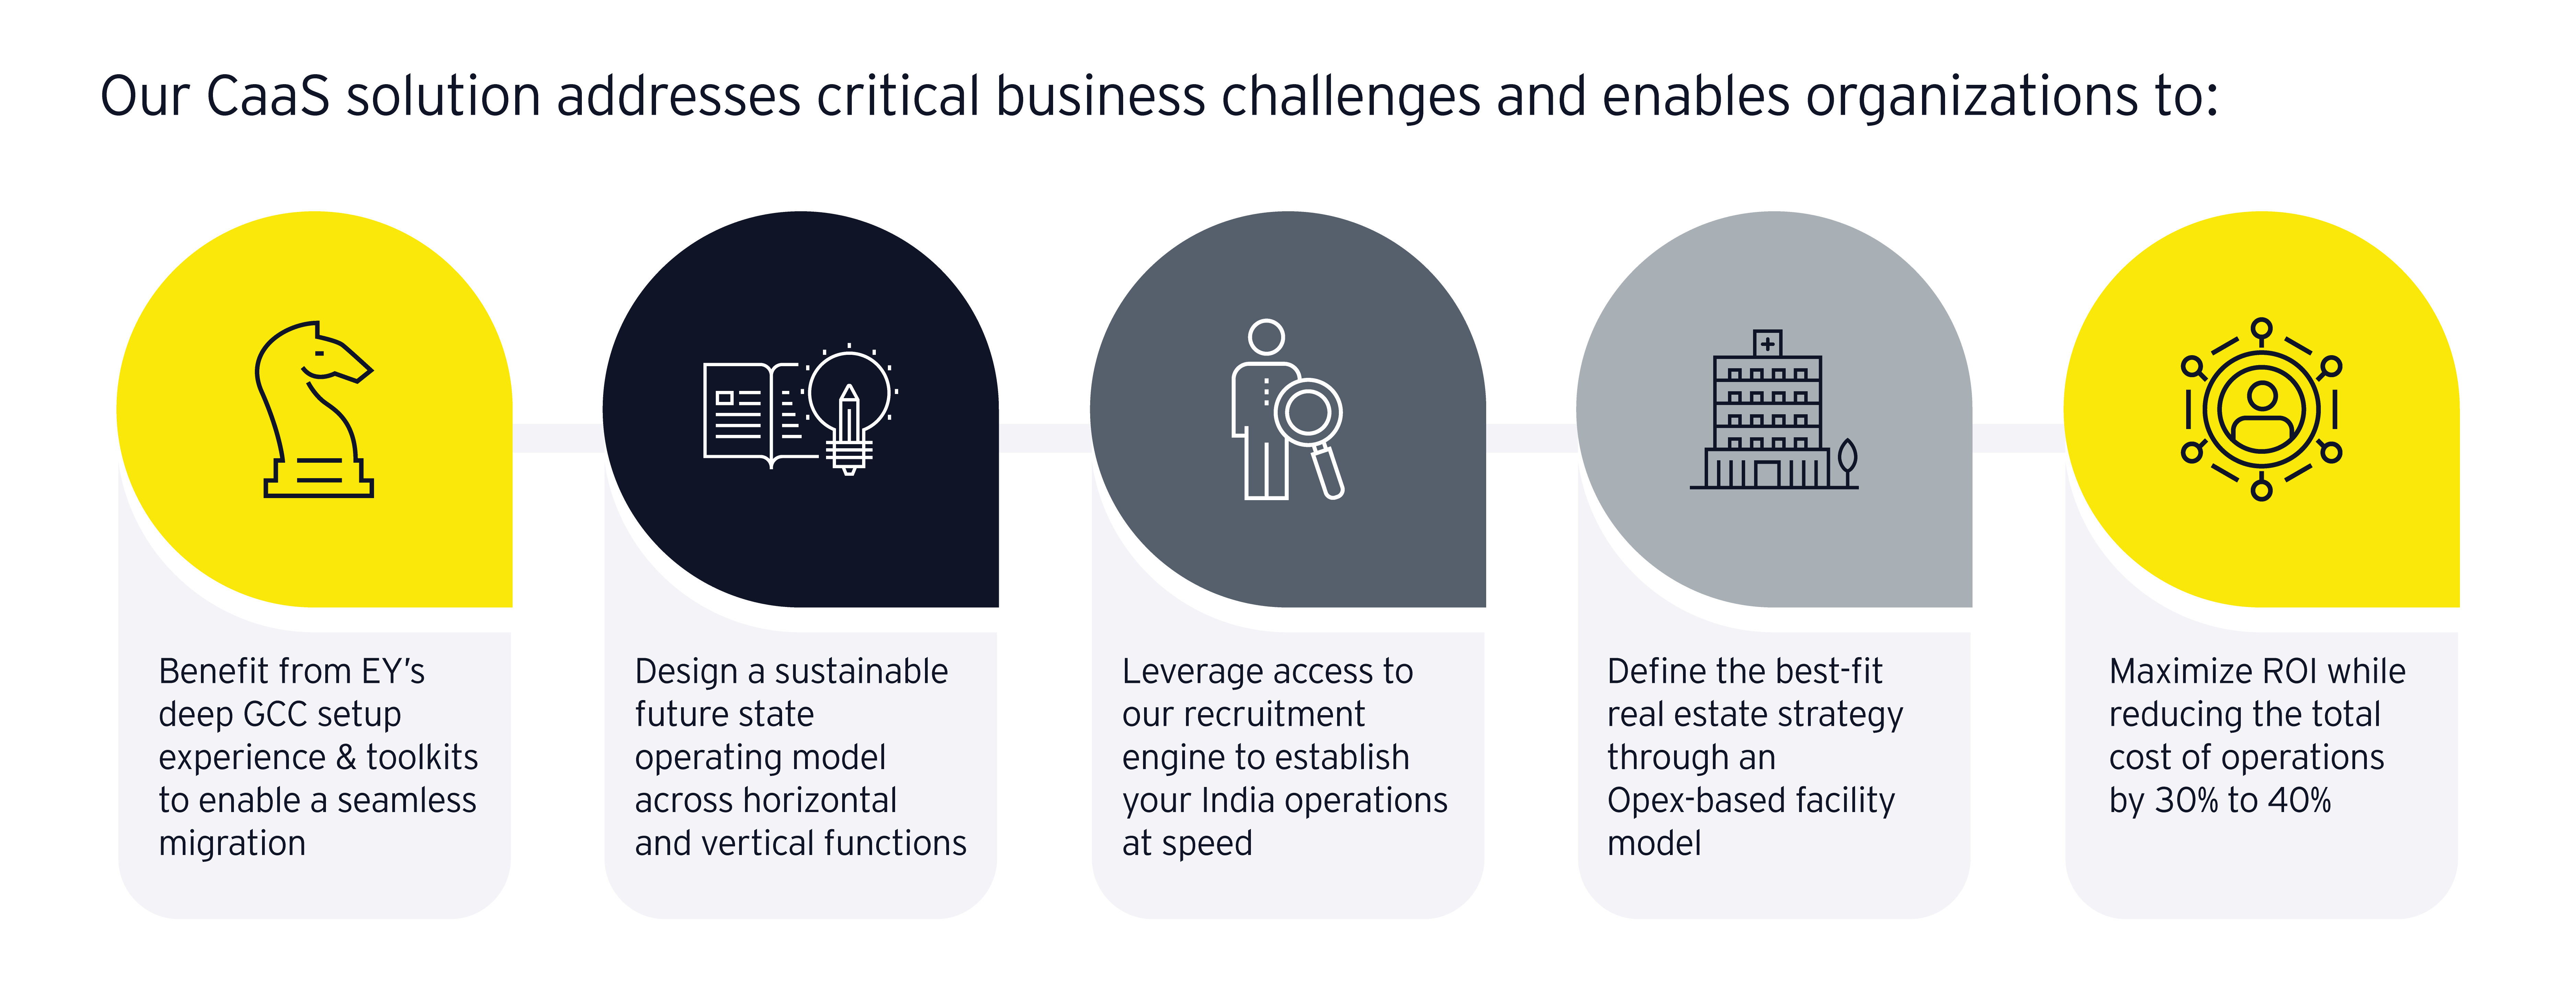 Our CaaS solution addresses critical business challenges and enables organizations to: